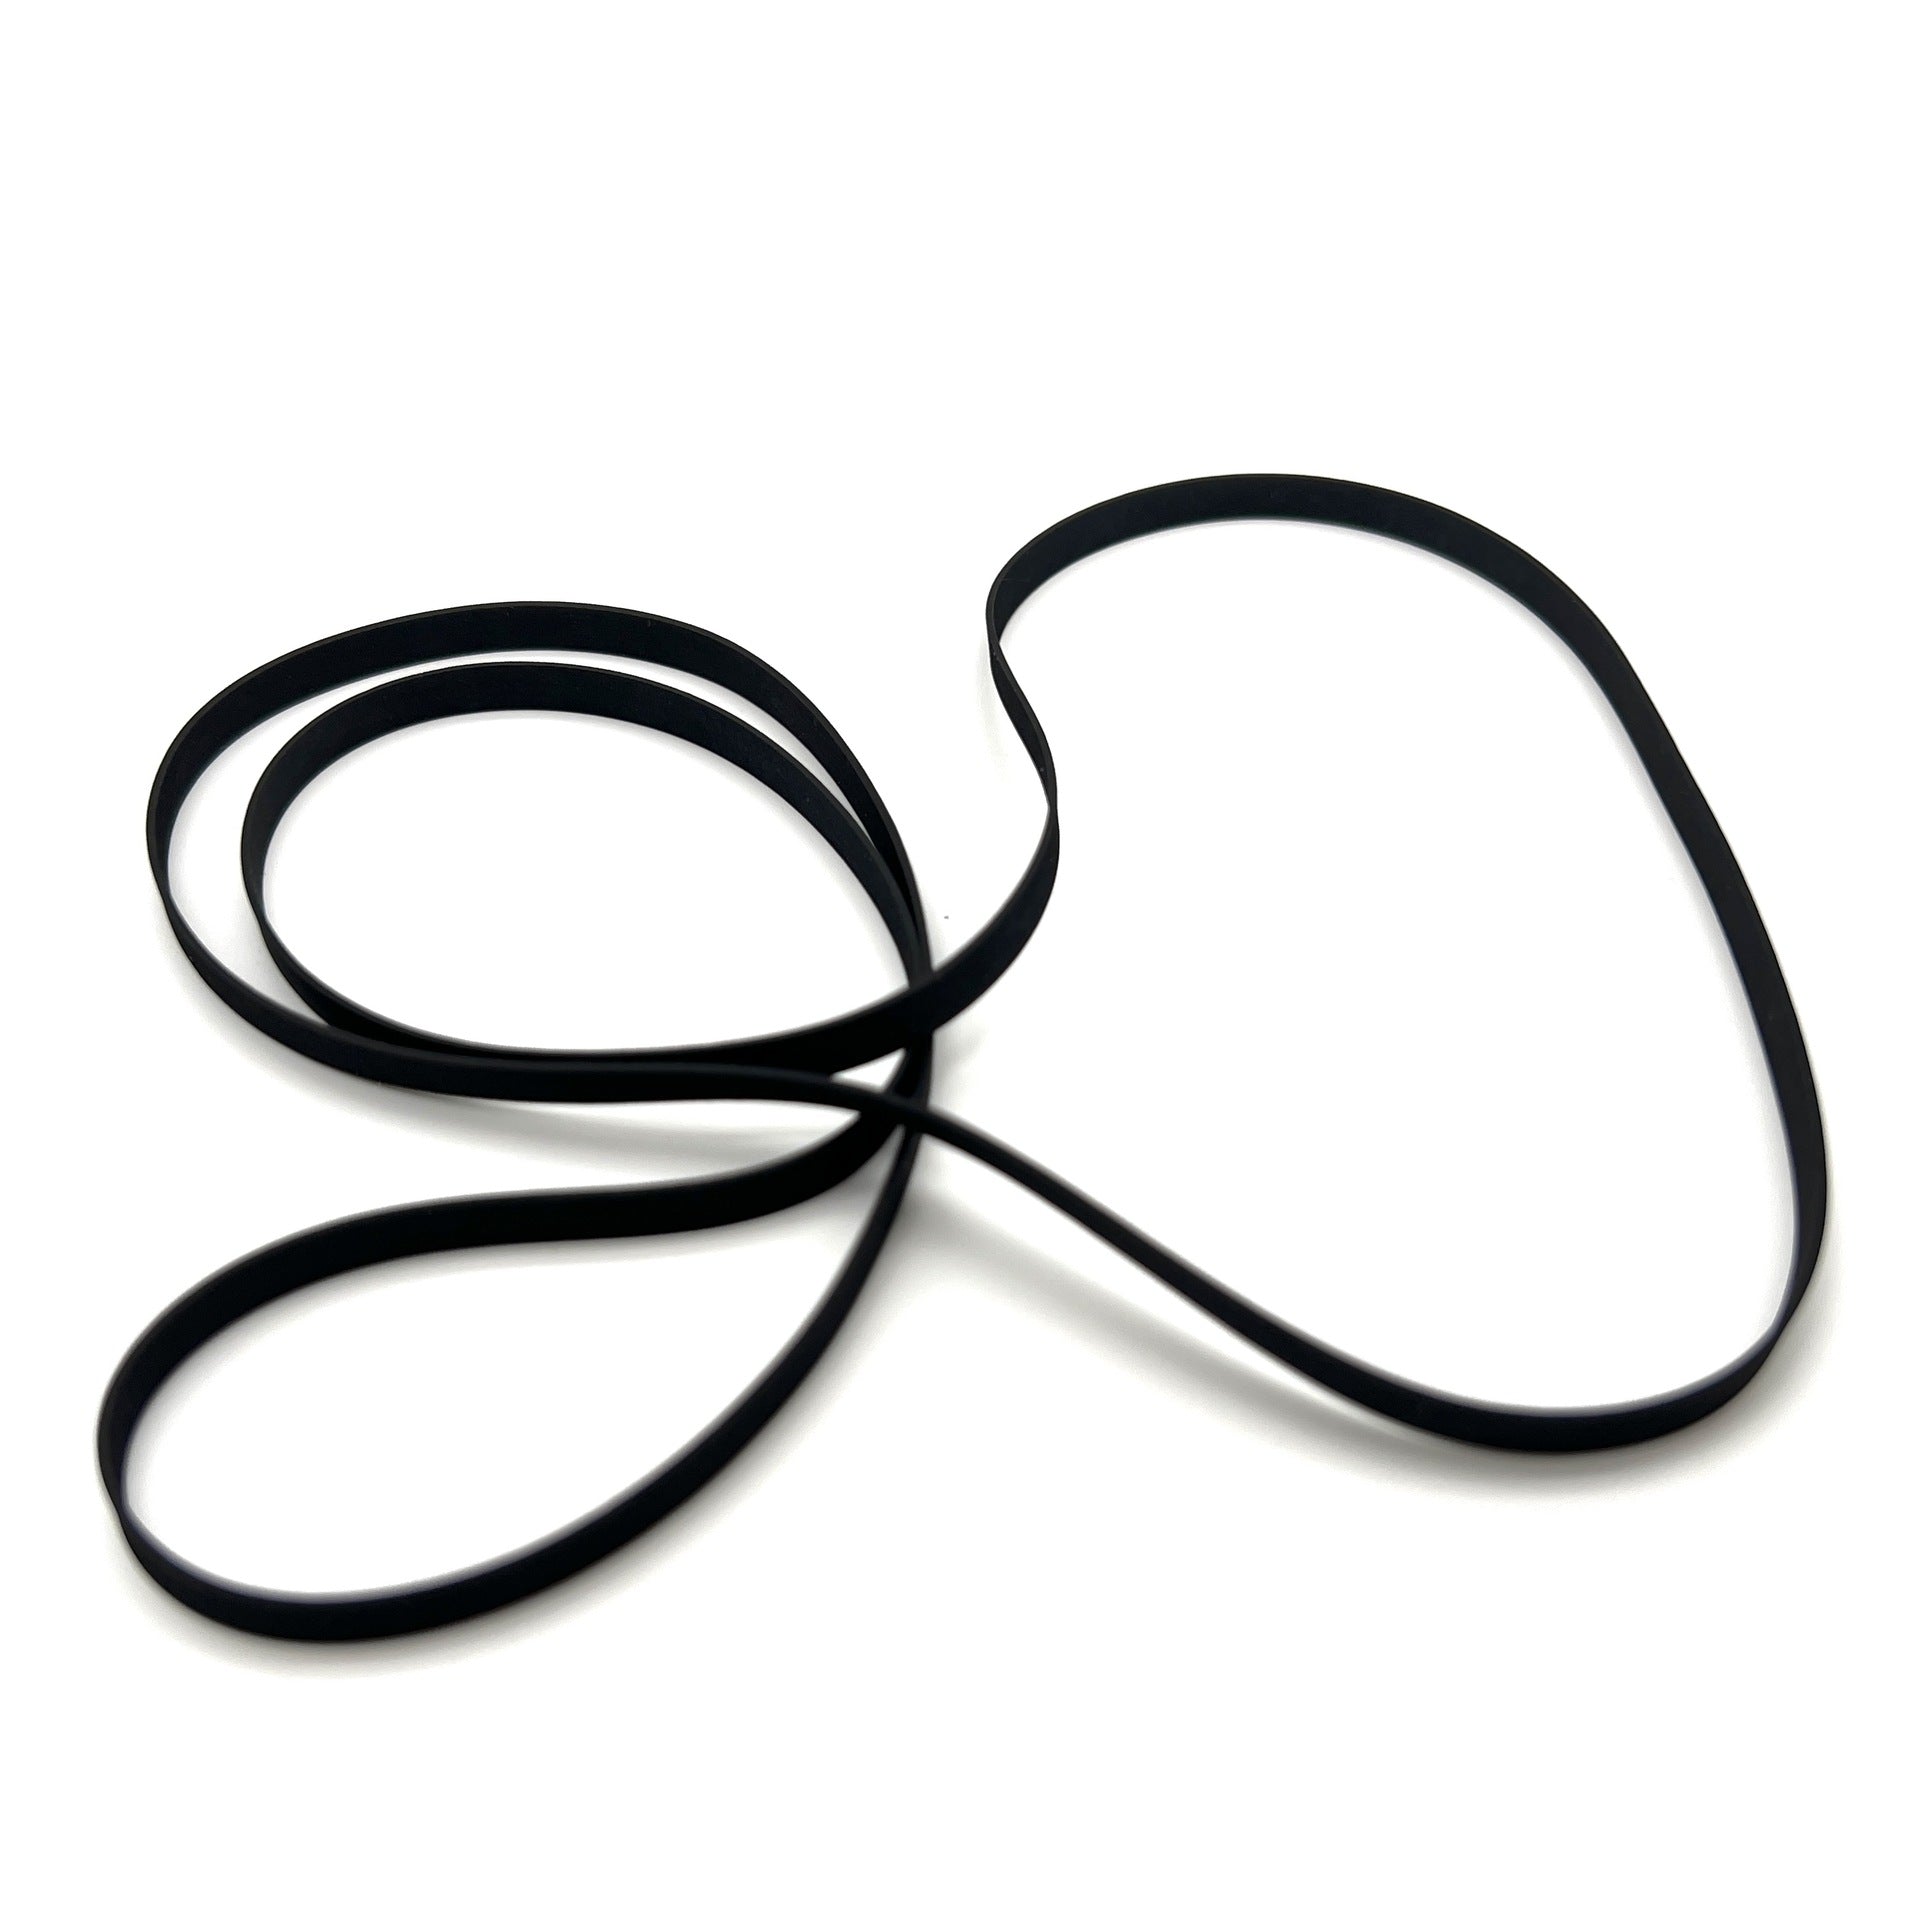 Phonograph VCR Record Player/Disc Drive Belt/Turntable Belt for Video - 200mm